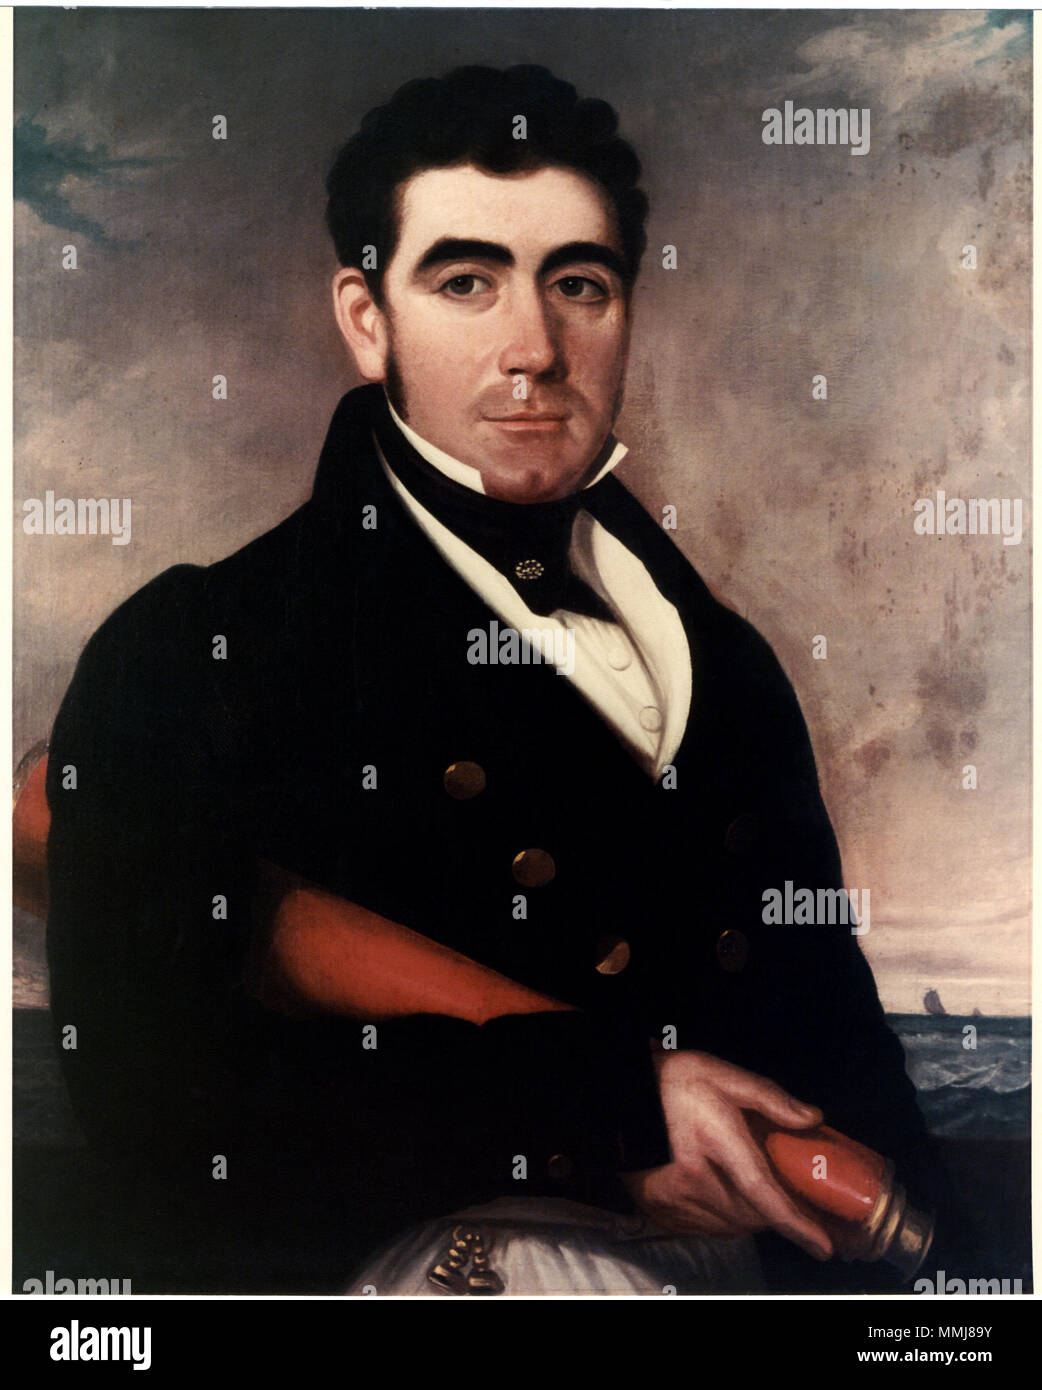 . English: Photo #: 80-G-K-22707 (color) Captain Thomas Macdonough, U.S.N. (1783-1825), 'The Hero of Lake Champlain' Portrait in oils, by an unknown artist. Photographed on 17 September 1954. The original painting is in Old North Church, 187 Salem Street, Boston, Massachusetts. Official U.S. Navy Photograph, now in the collections of the National Archives.  . 17 September 1954. Unknown Captain Thomas Macdonough, U.S.N. Stock Photo